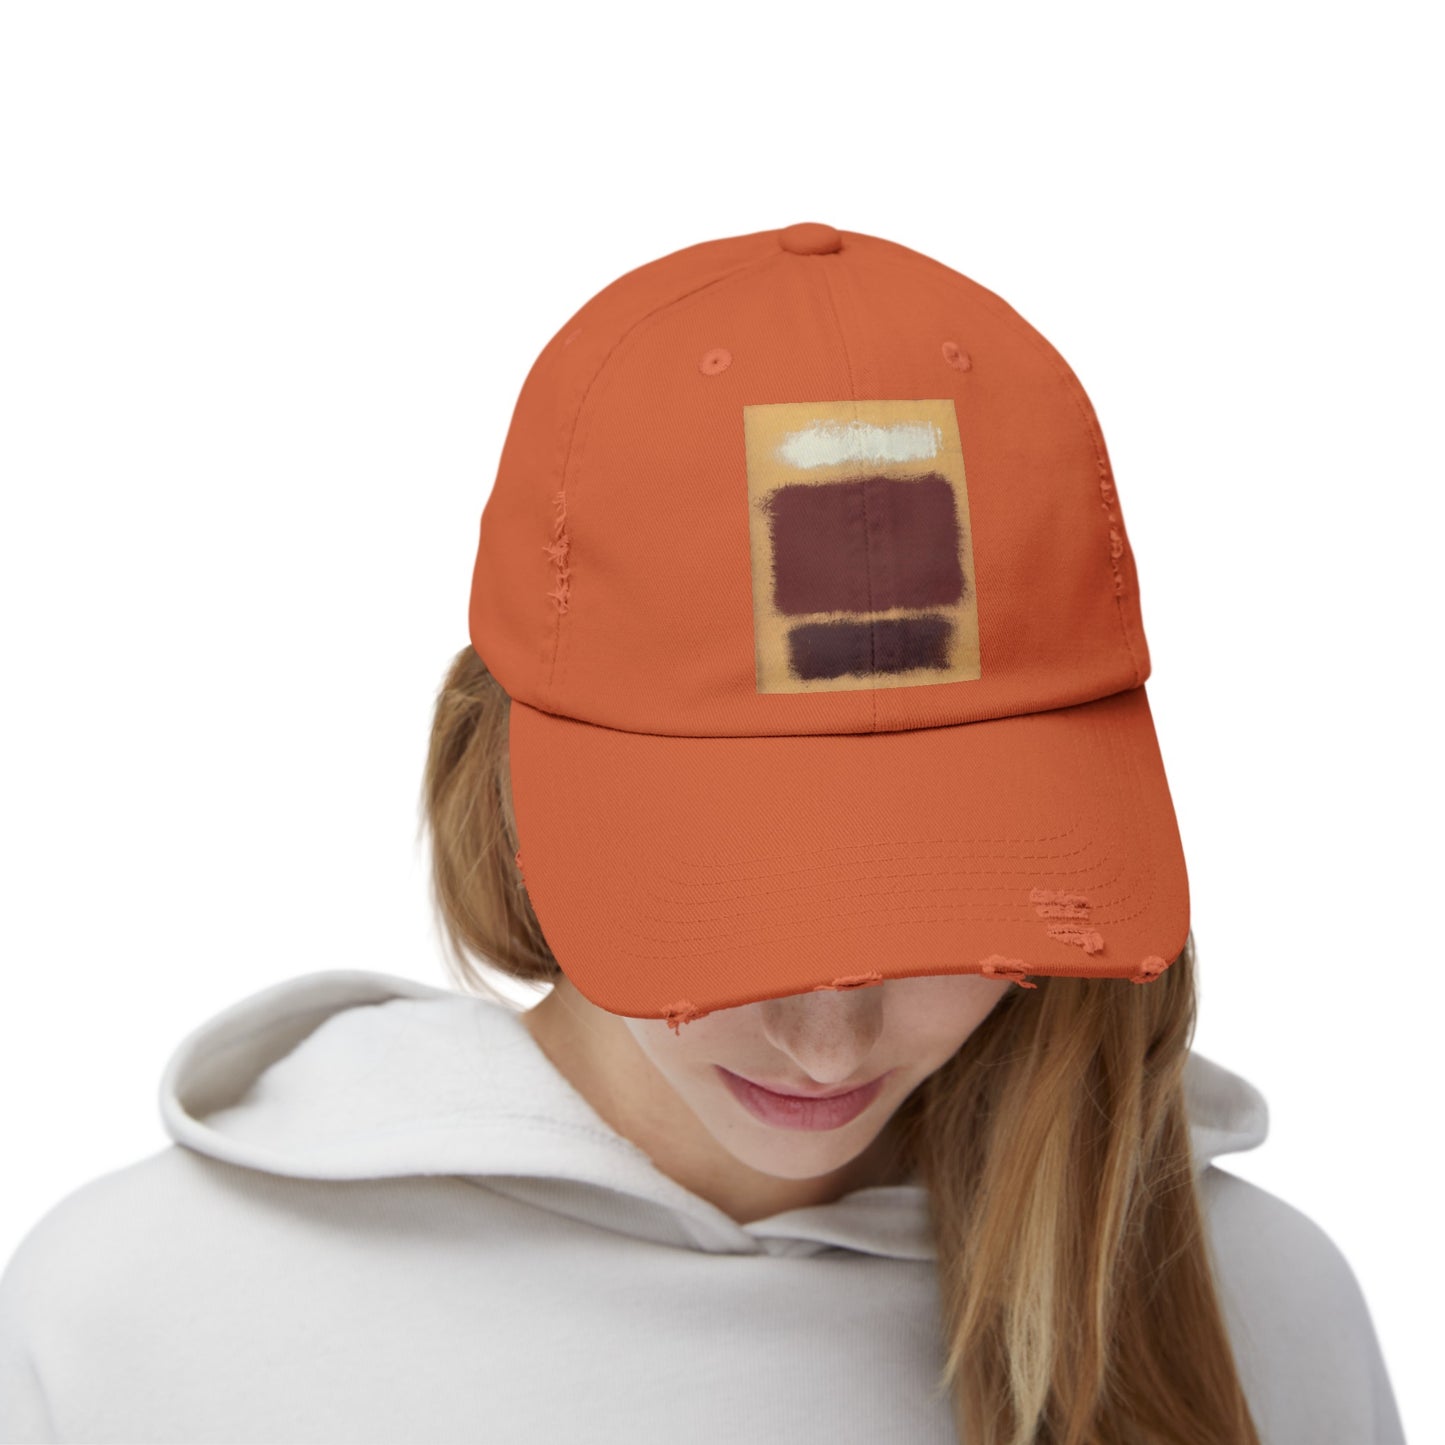 a woman wearing an orange hat with a patch on it